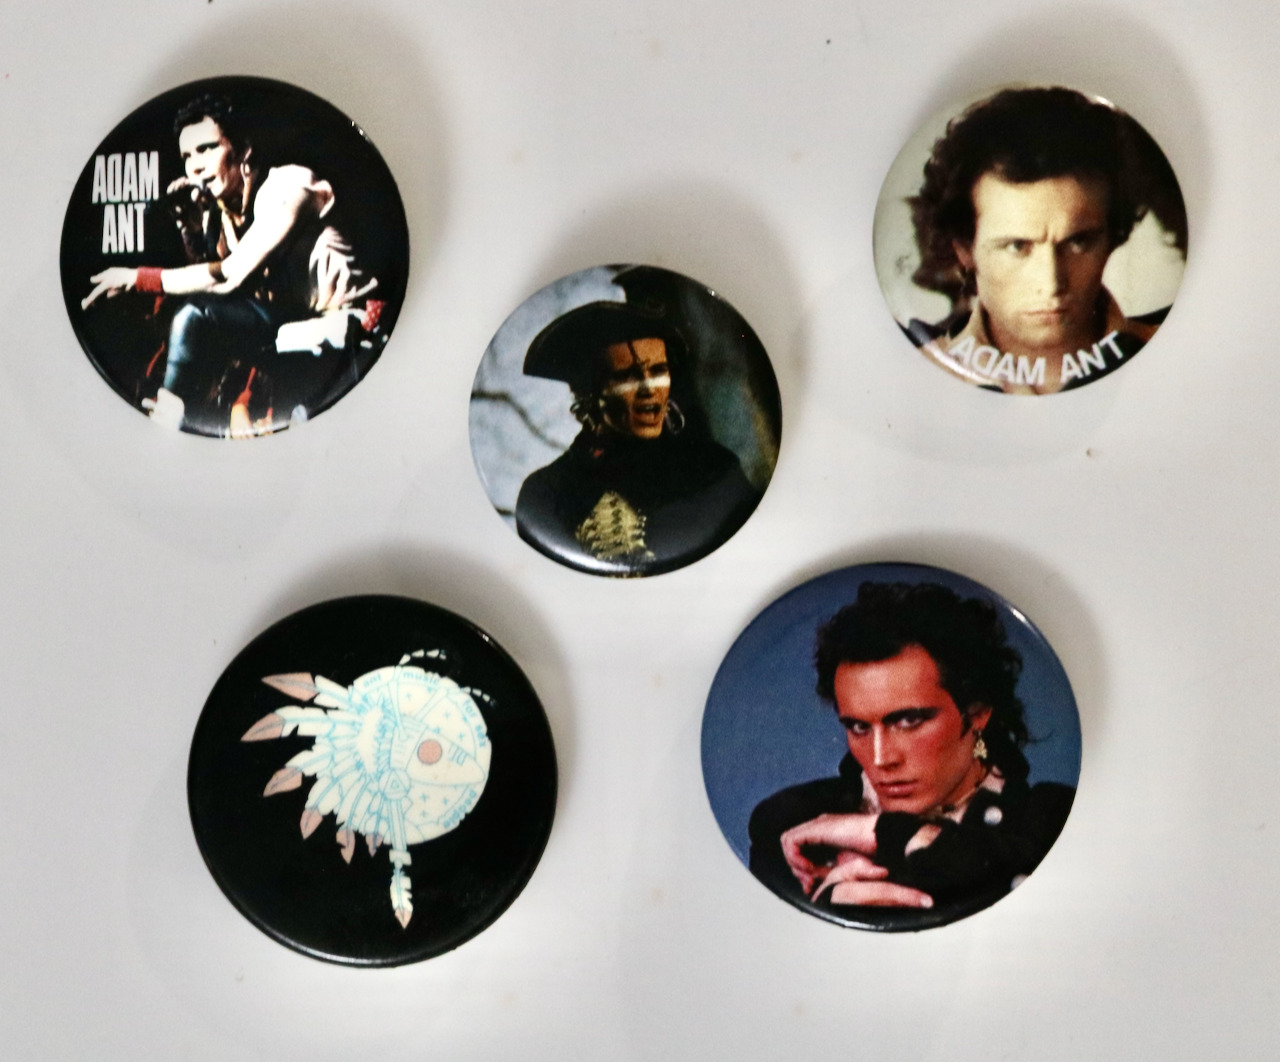 ADAM ANT set of 5 vintage badge pins  Adam and the Ants